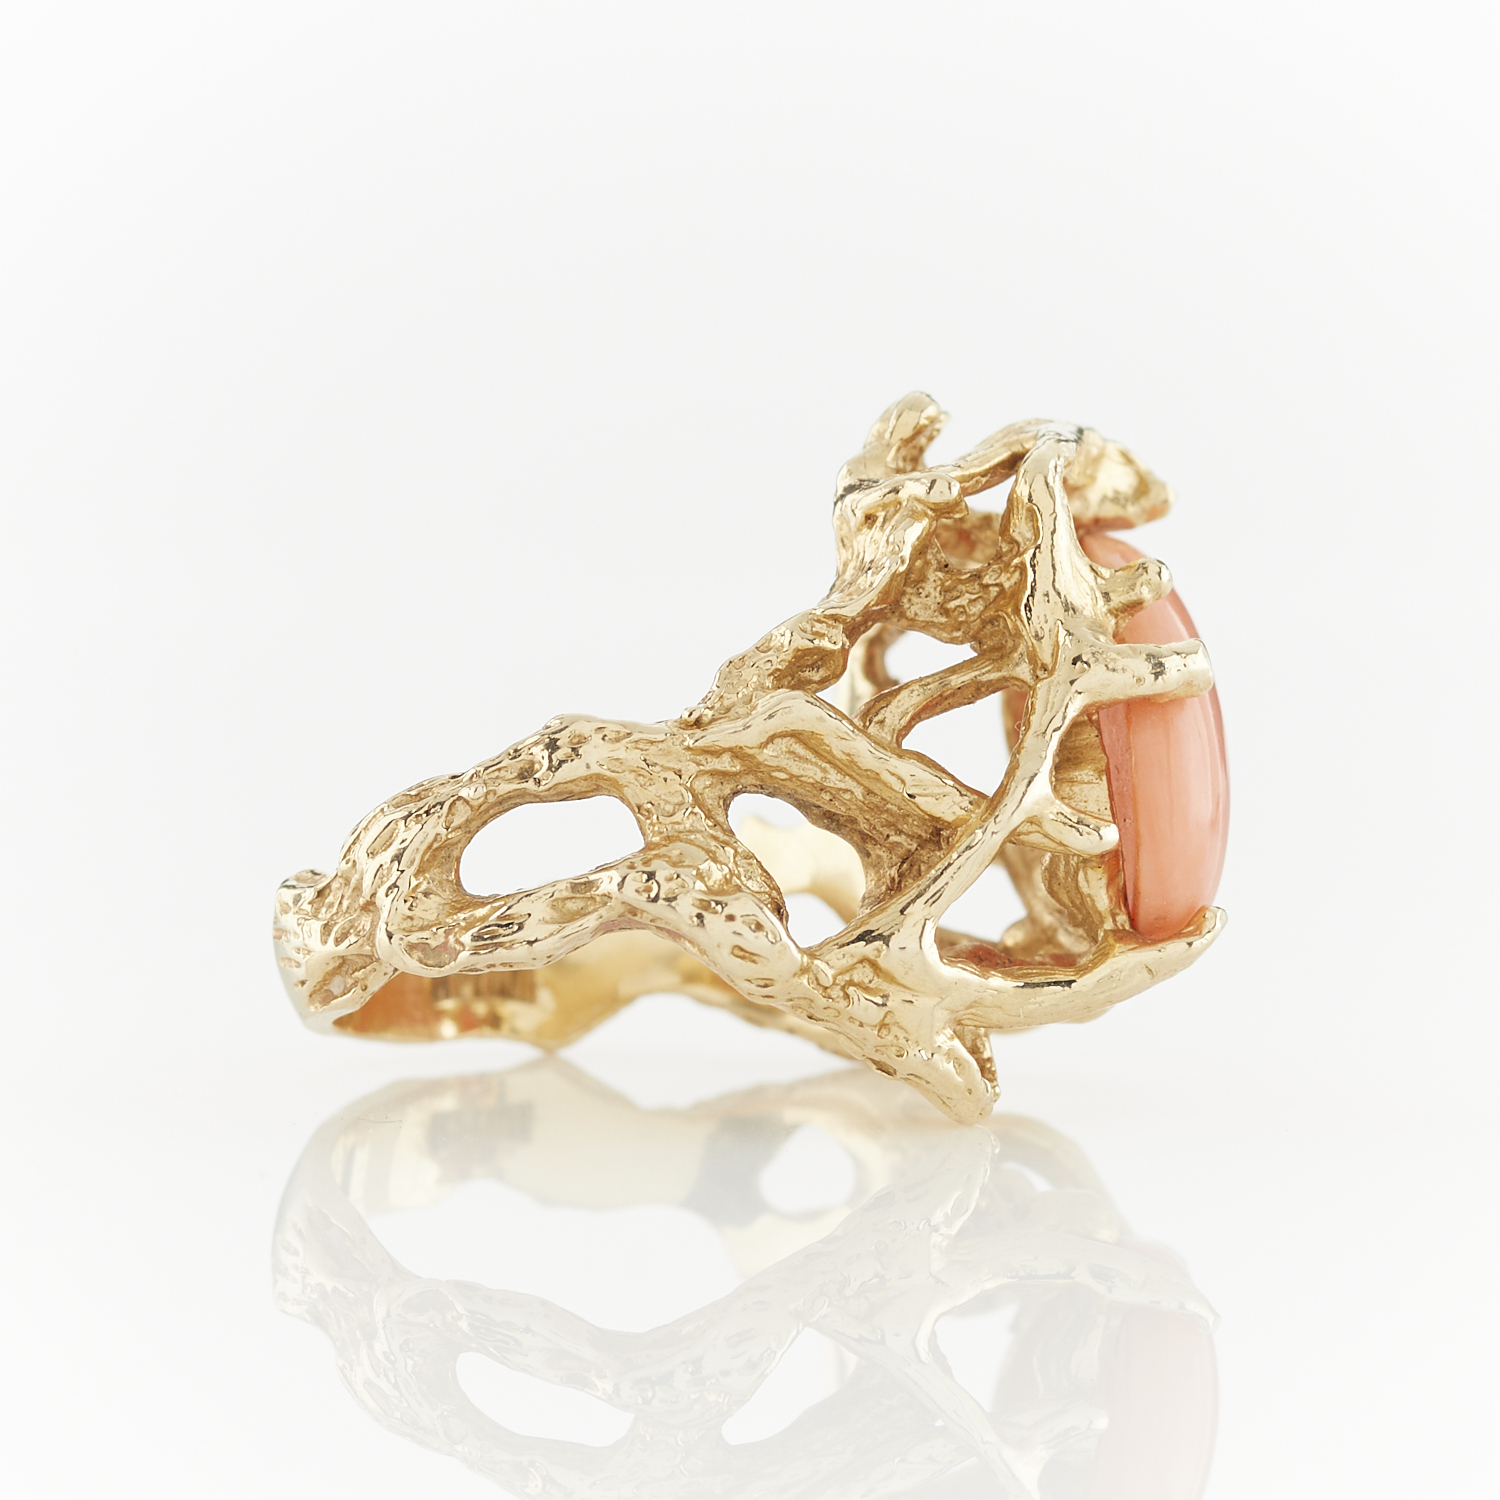 14k Yellow Gold & Coral Ring - Image 4 of 11